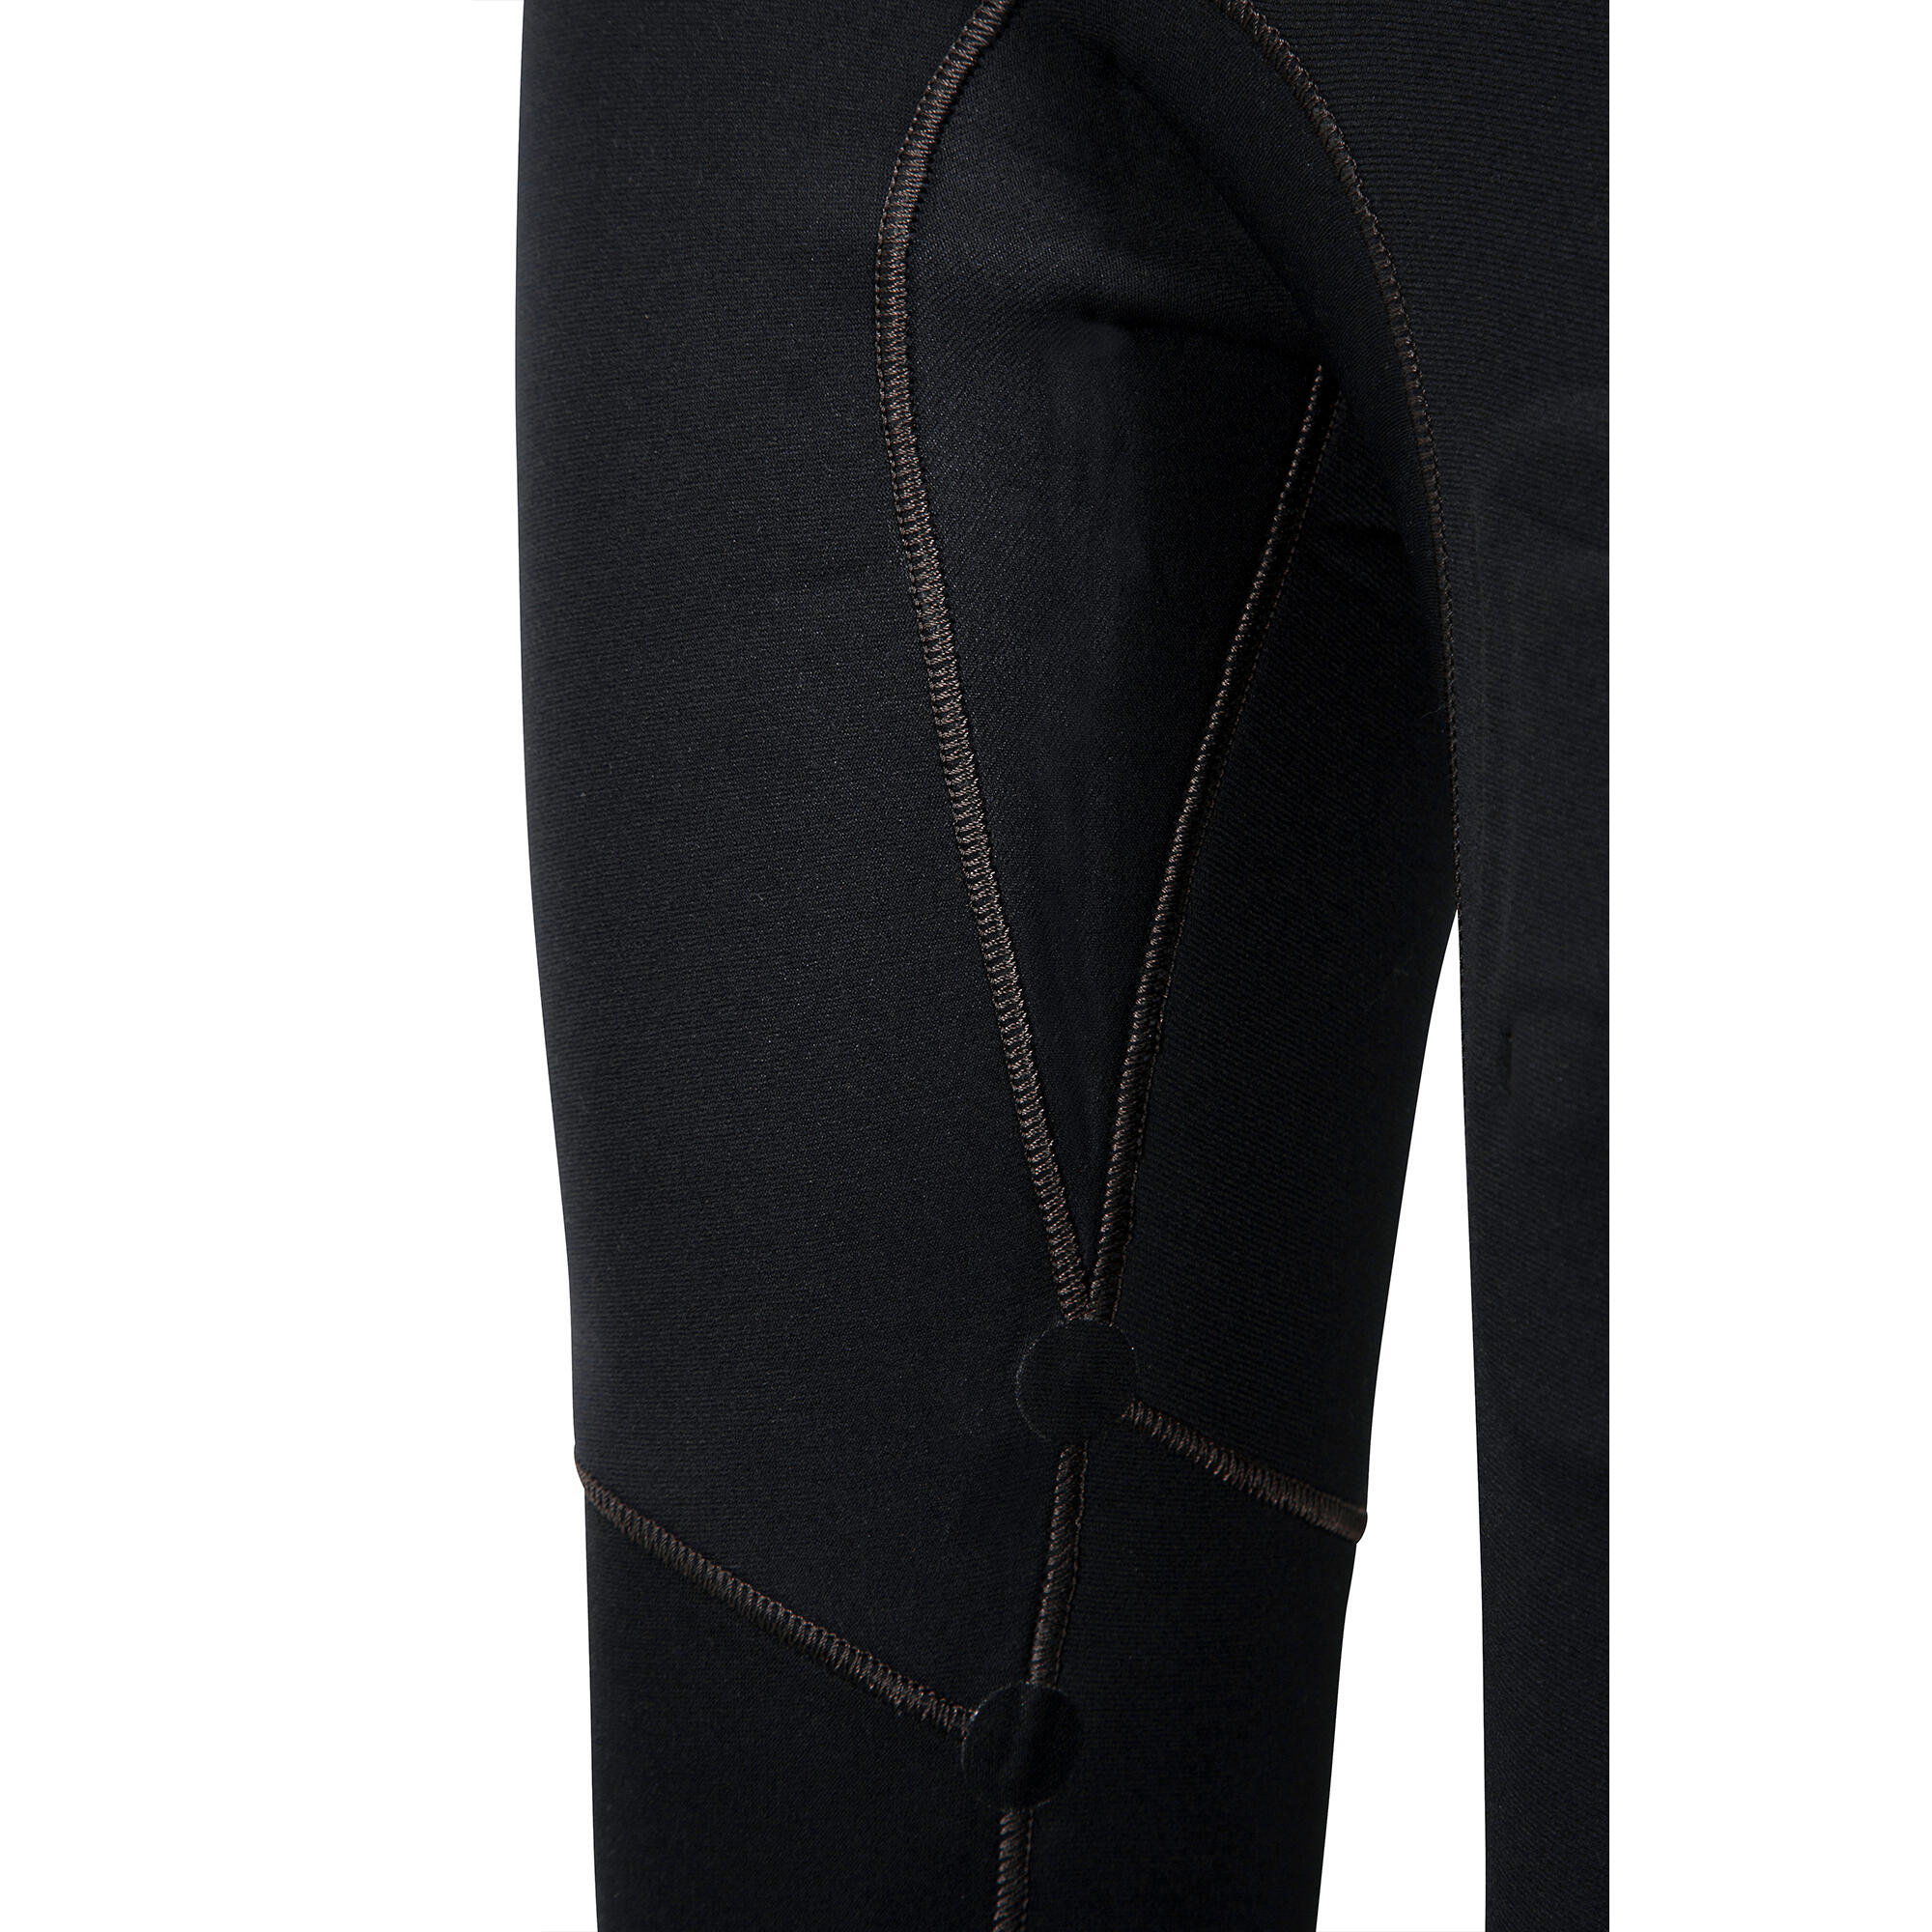 Women's Canyoning Wetsuit Trousers 5 mm - MK 500 8/17